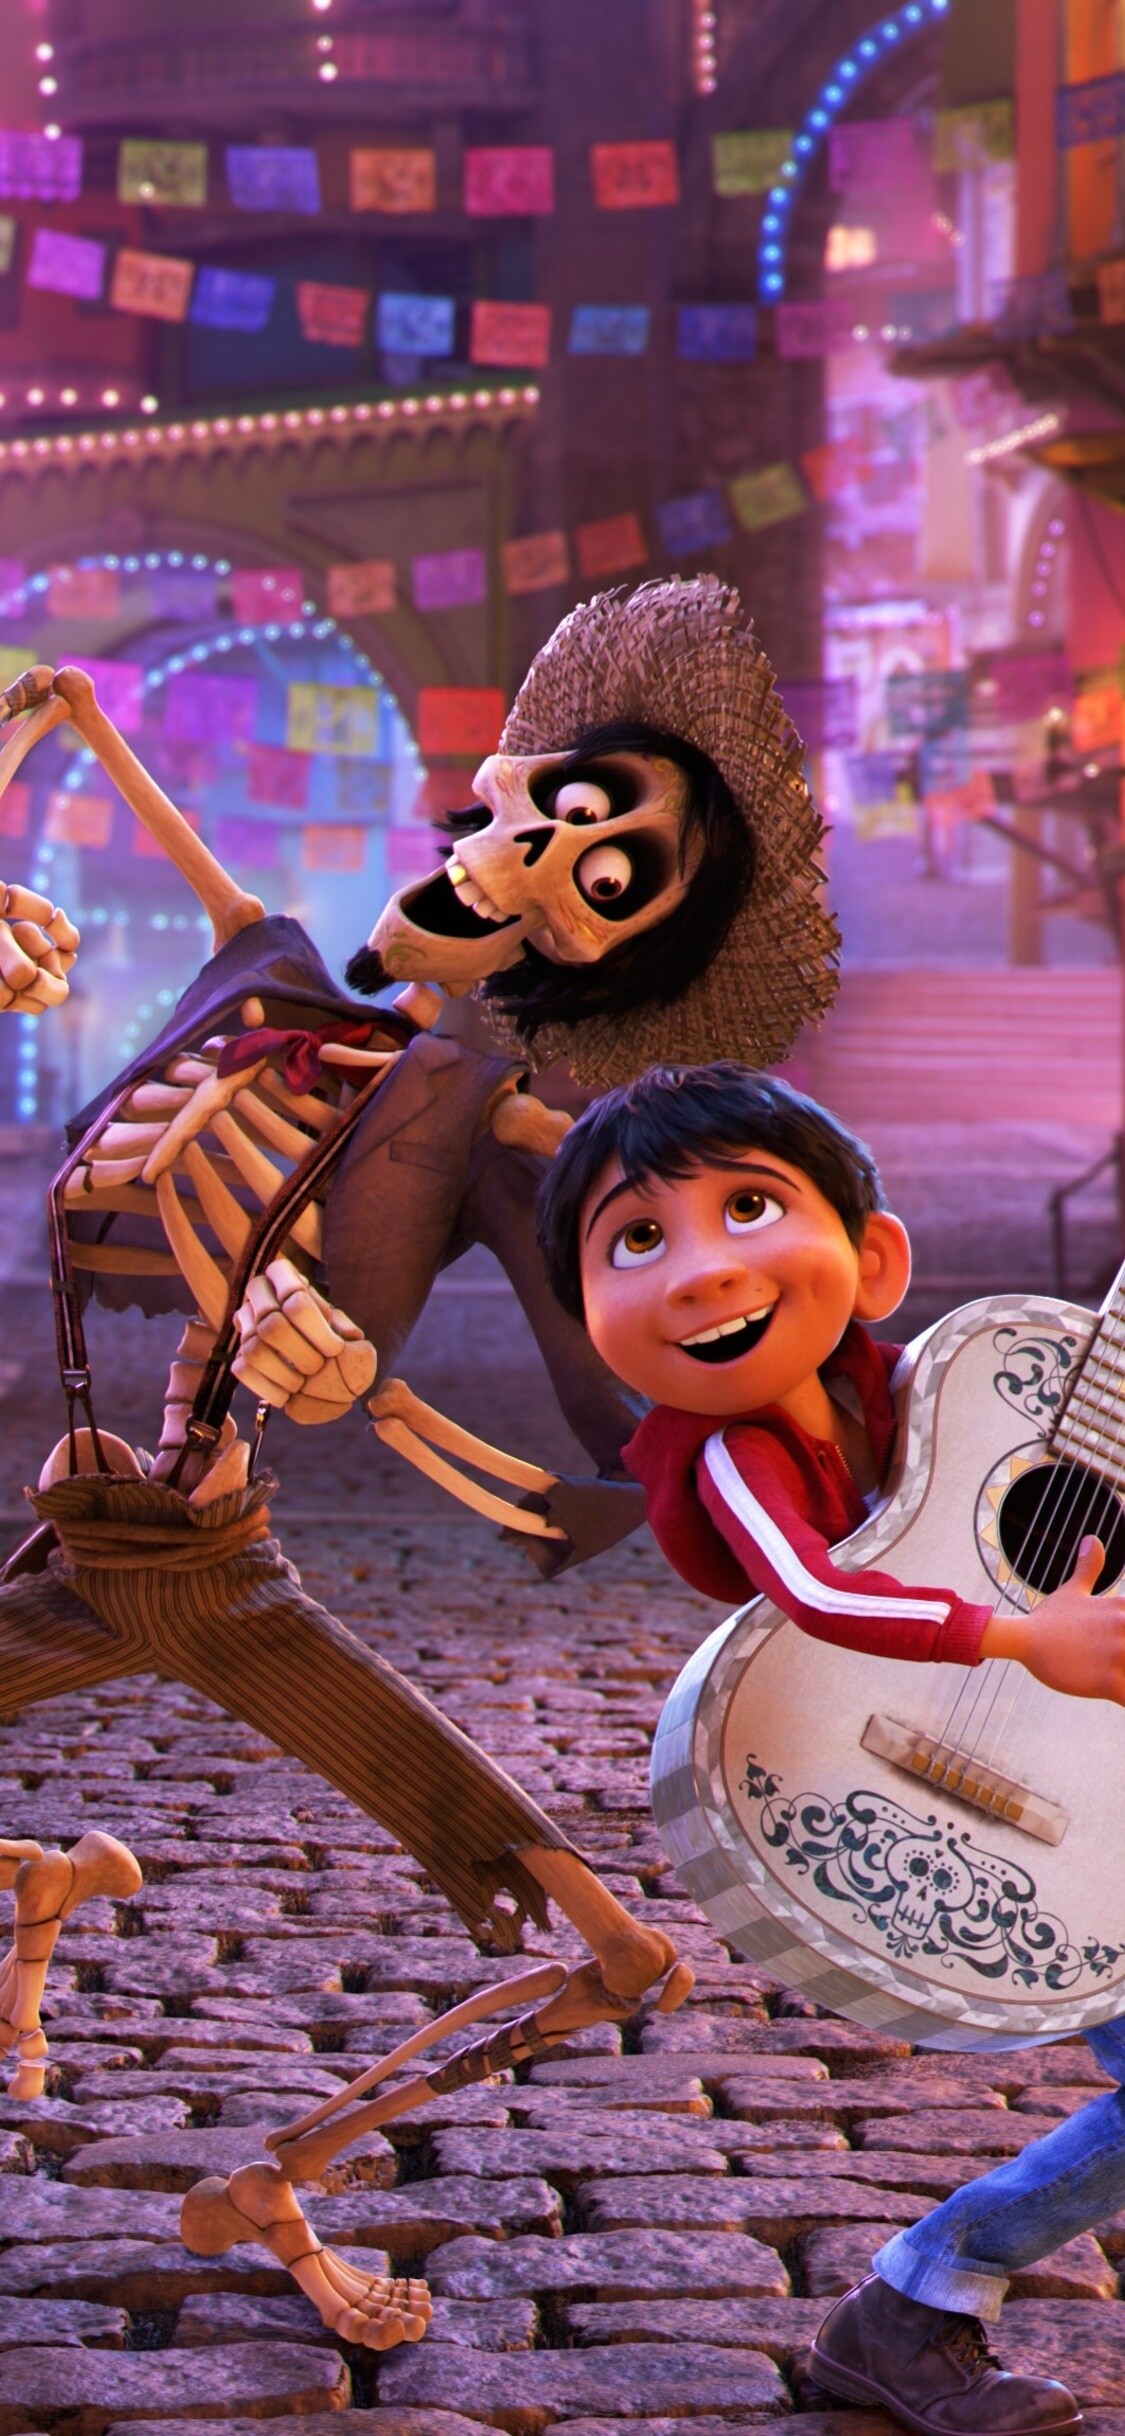 Coco (Cartoon): Miguel is a 12-year-old who struggles against his family’s generations-old ban on music. 1130x2440 HD Background.